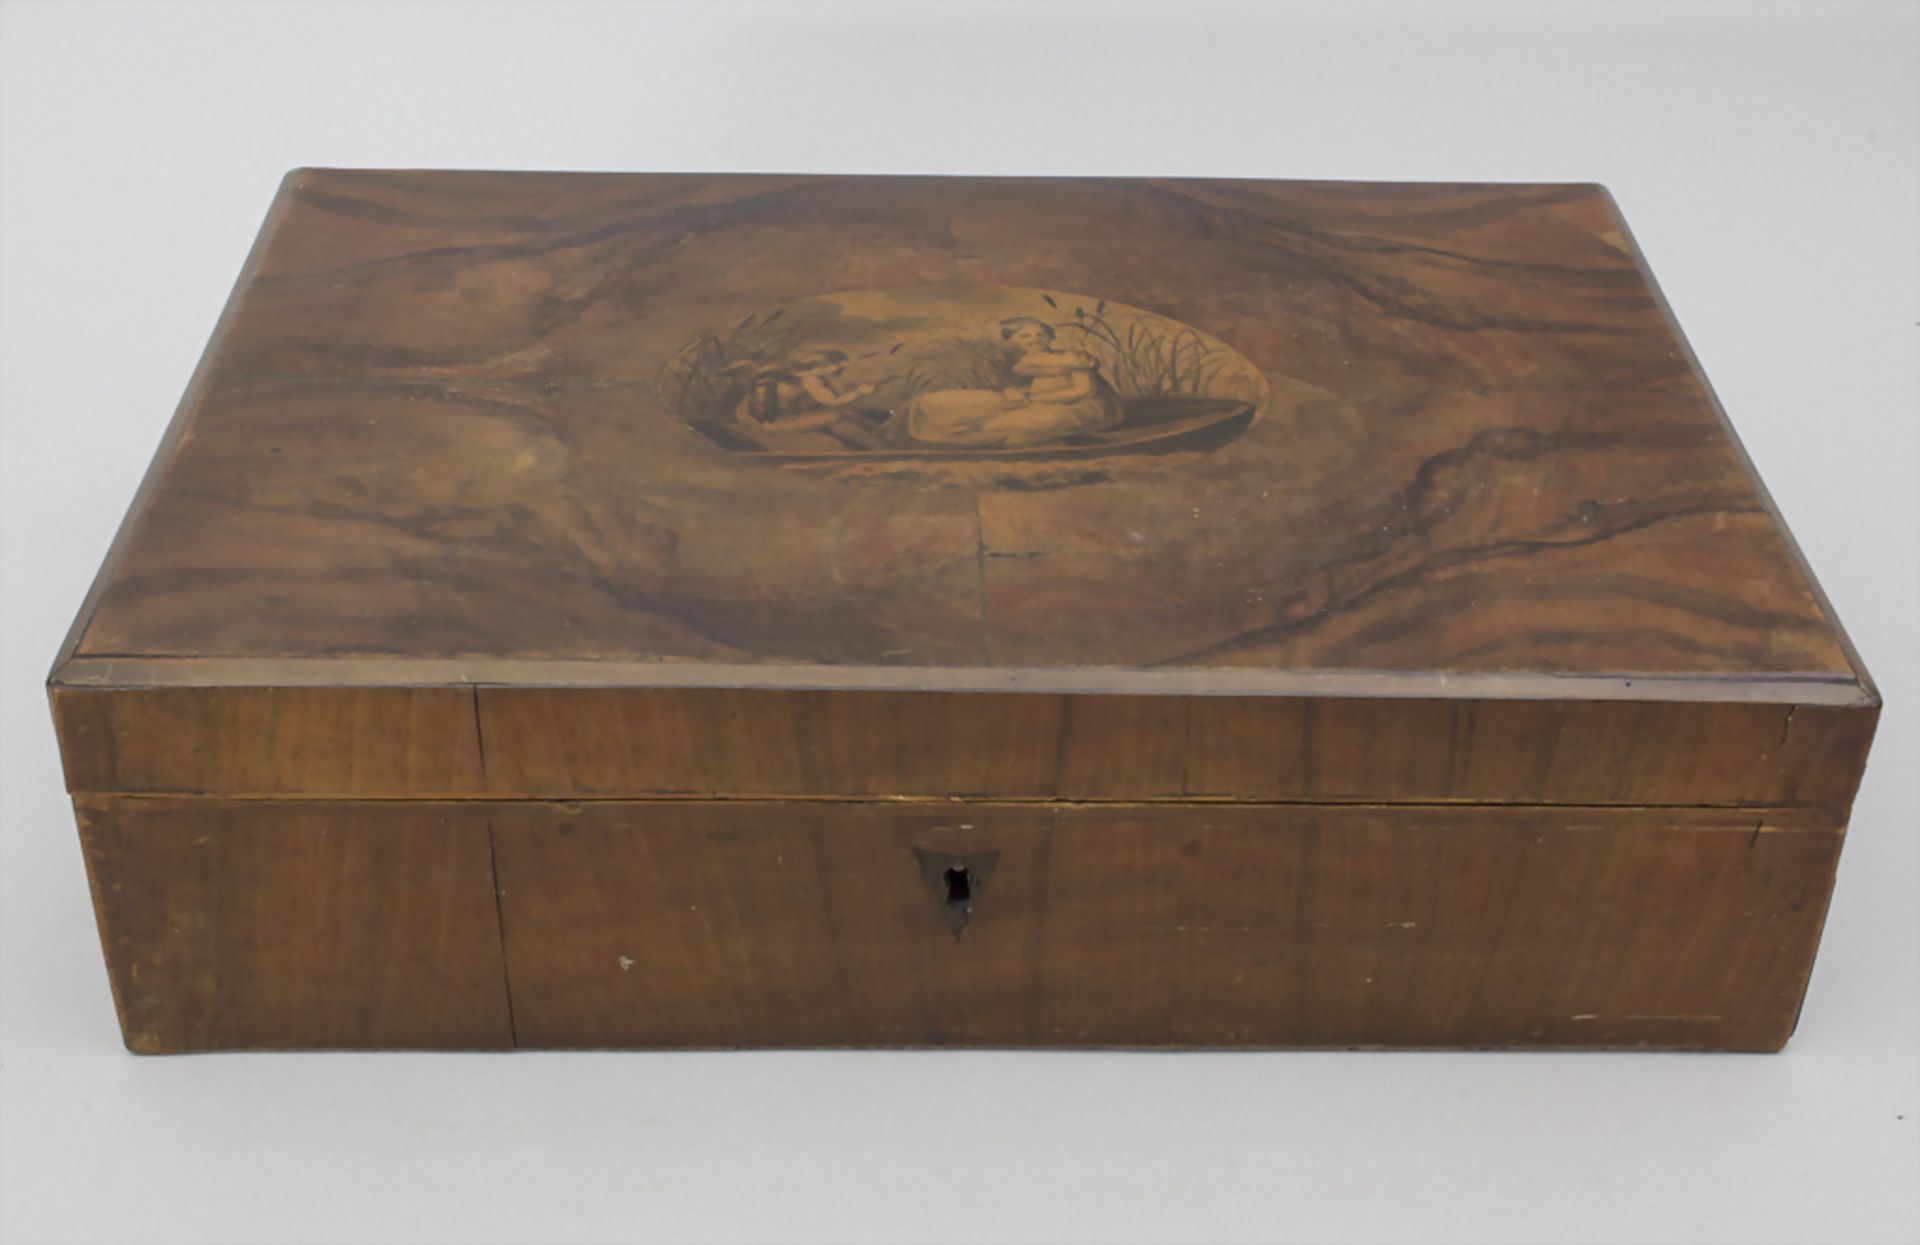 Schatulle mit 'Dame mit Amor im Boot' / A casket with 'A lady with a cupid in a boat', Ende 19. Jh.